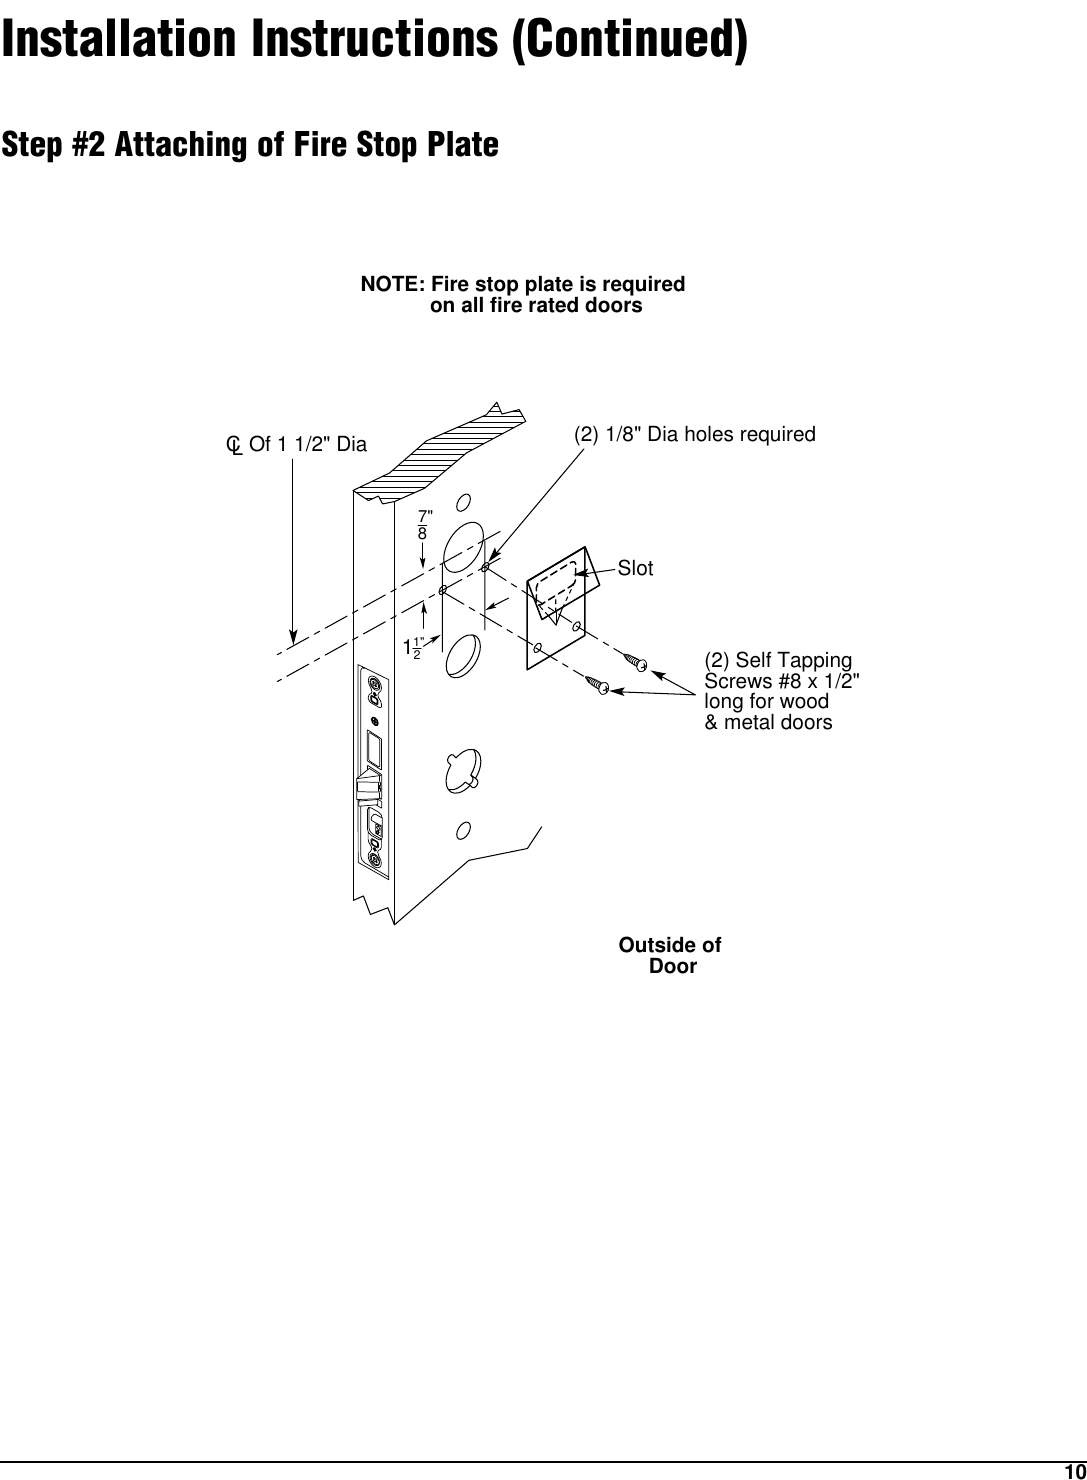 10Installation Instructions (Continued)Step #2 Attaching of Fire Stop PlateOutside of DoorCL Of 1 1/2&quot; Dia(2) Self Tapping Screws #8 x 1/2&quot; long for wood &amp; metal doors(2) 1/8&quot; Dia holes required7&quot;81&quot;2Slot1NOTE: Fire stop plate is required            on all fire rated doors